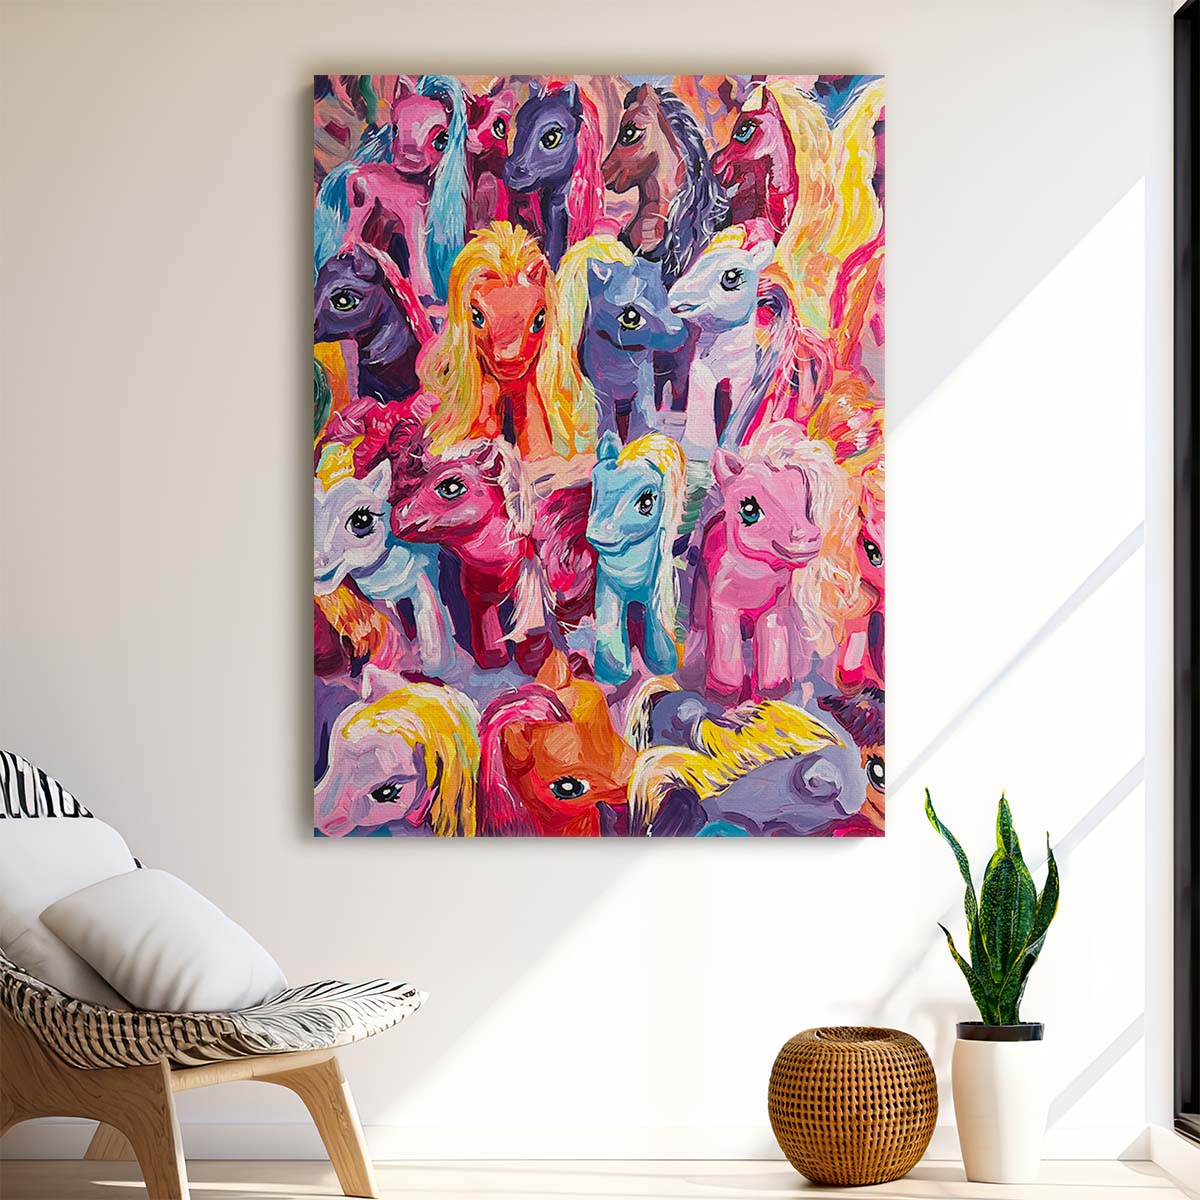 Colorful Ponies Illustration Nostalgic 90s Kids' Playroom Wall Art by Luxuriance Designs, made in USA